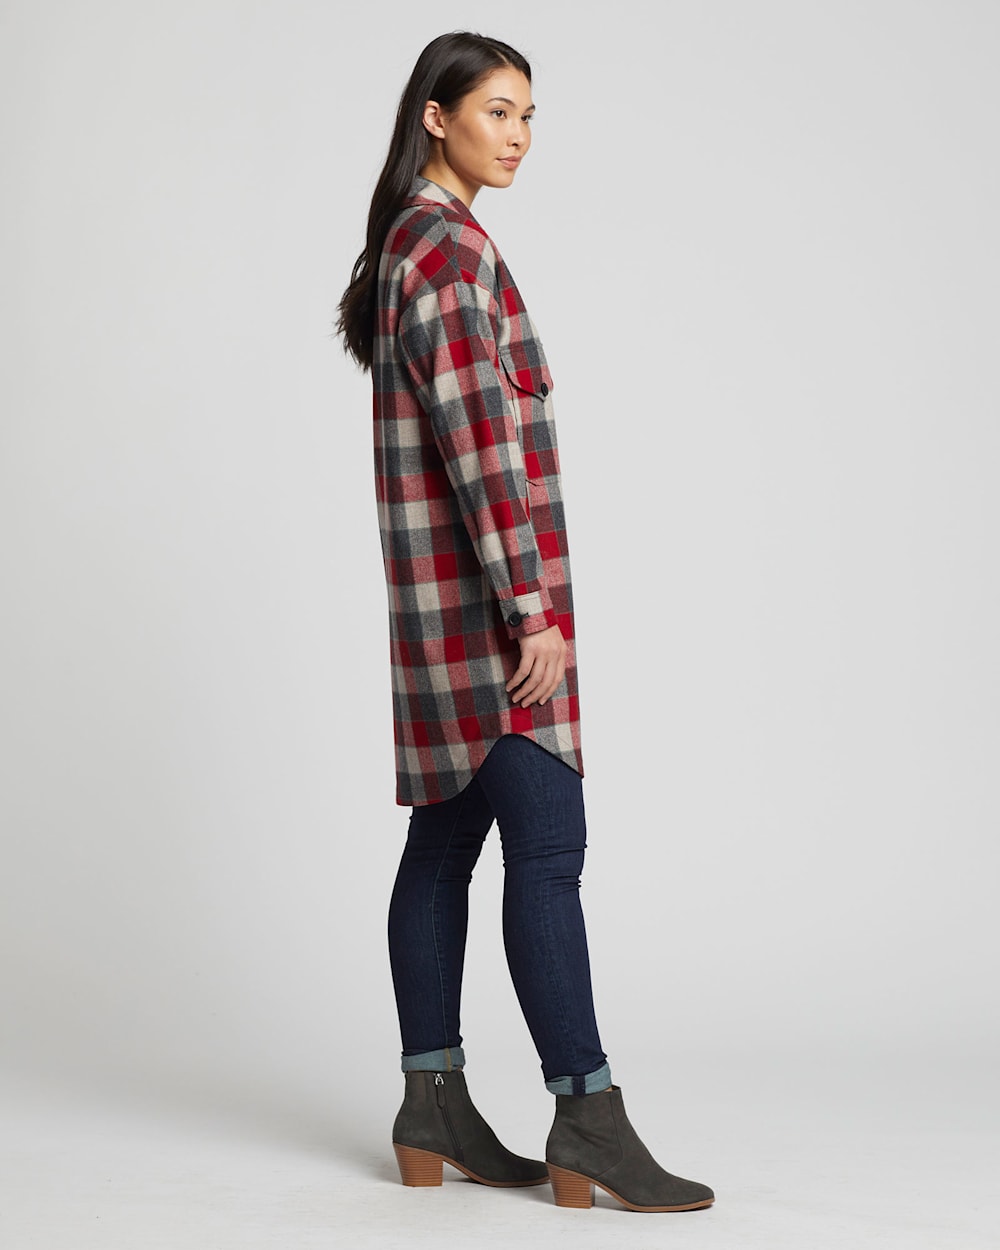 ALTERNATE VIEW OF WOMEN'S OVERSIZED WOOL SHIRT IN RED/TAN BLOCK PLAID image number 2